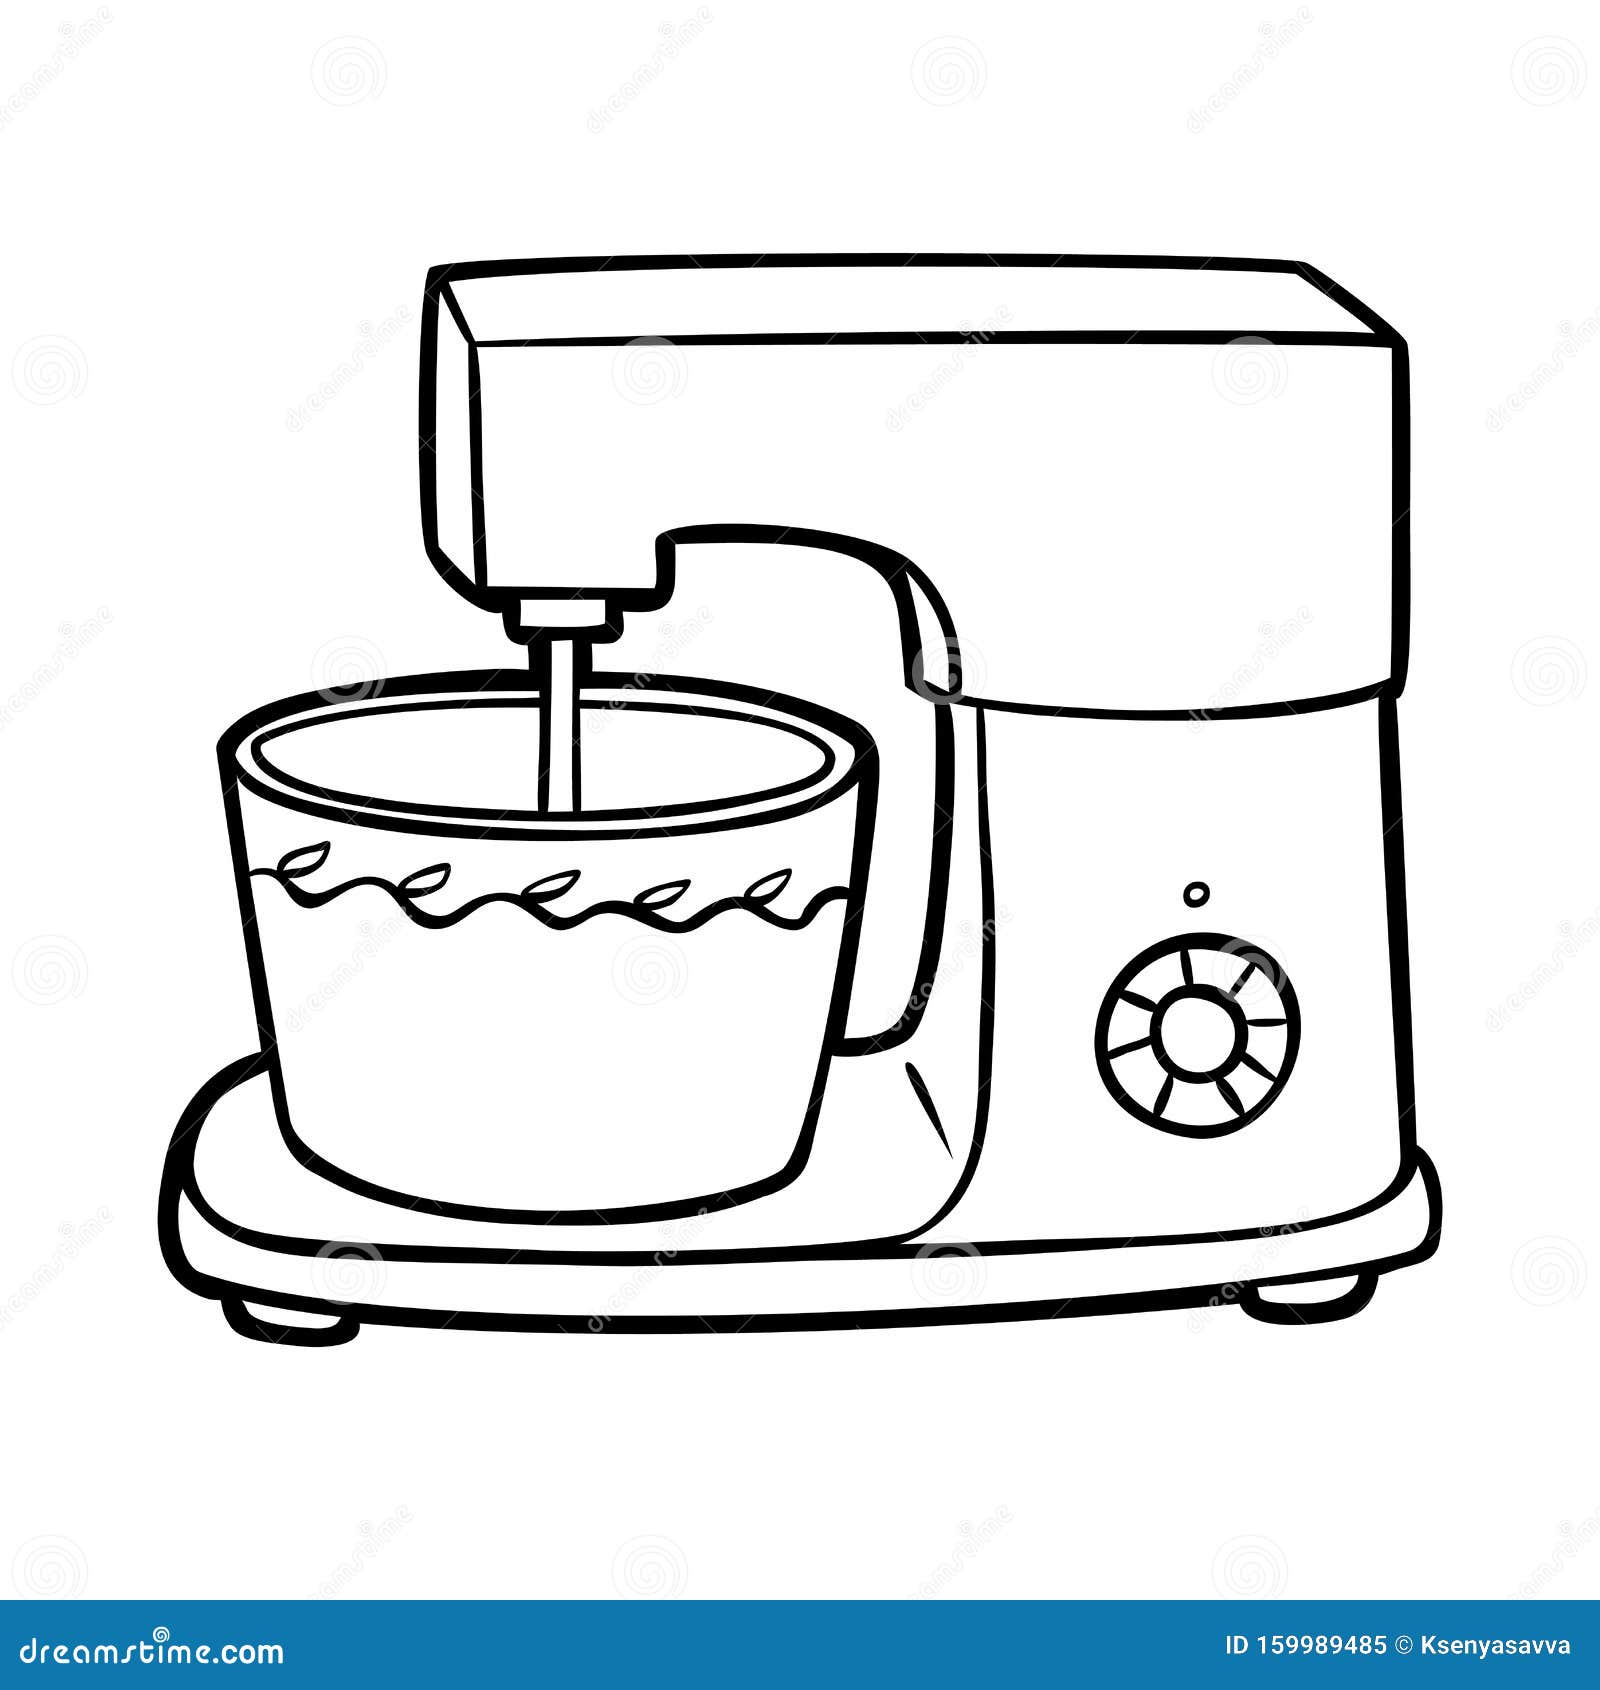 Mixer Coloring Pages